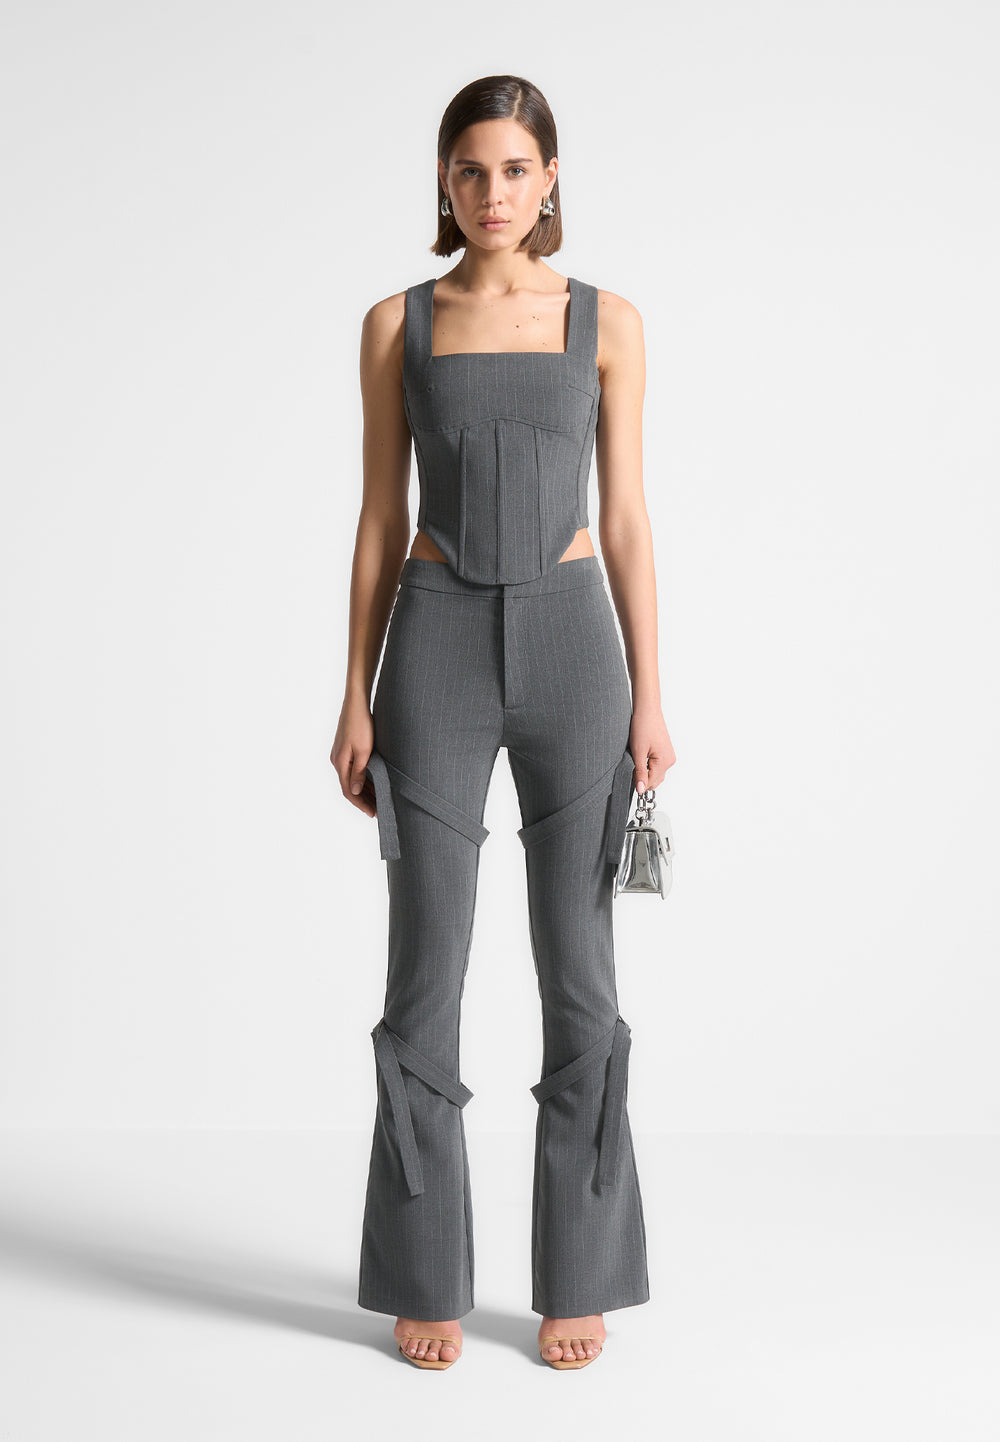 strap-detail-pinstripe-fit-and-flare-leggings-grey